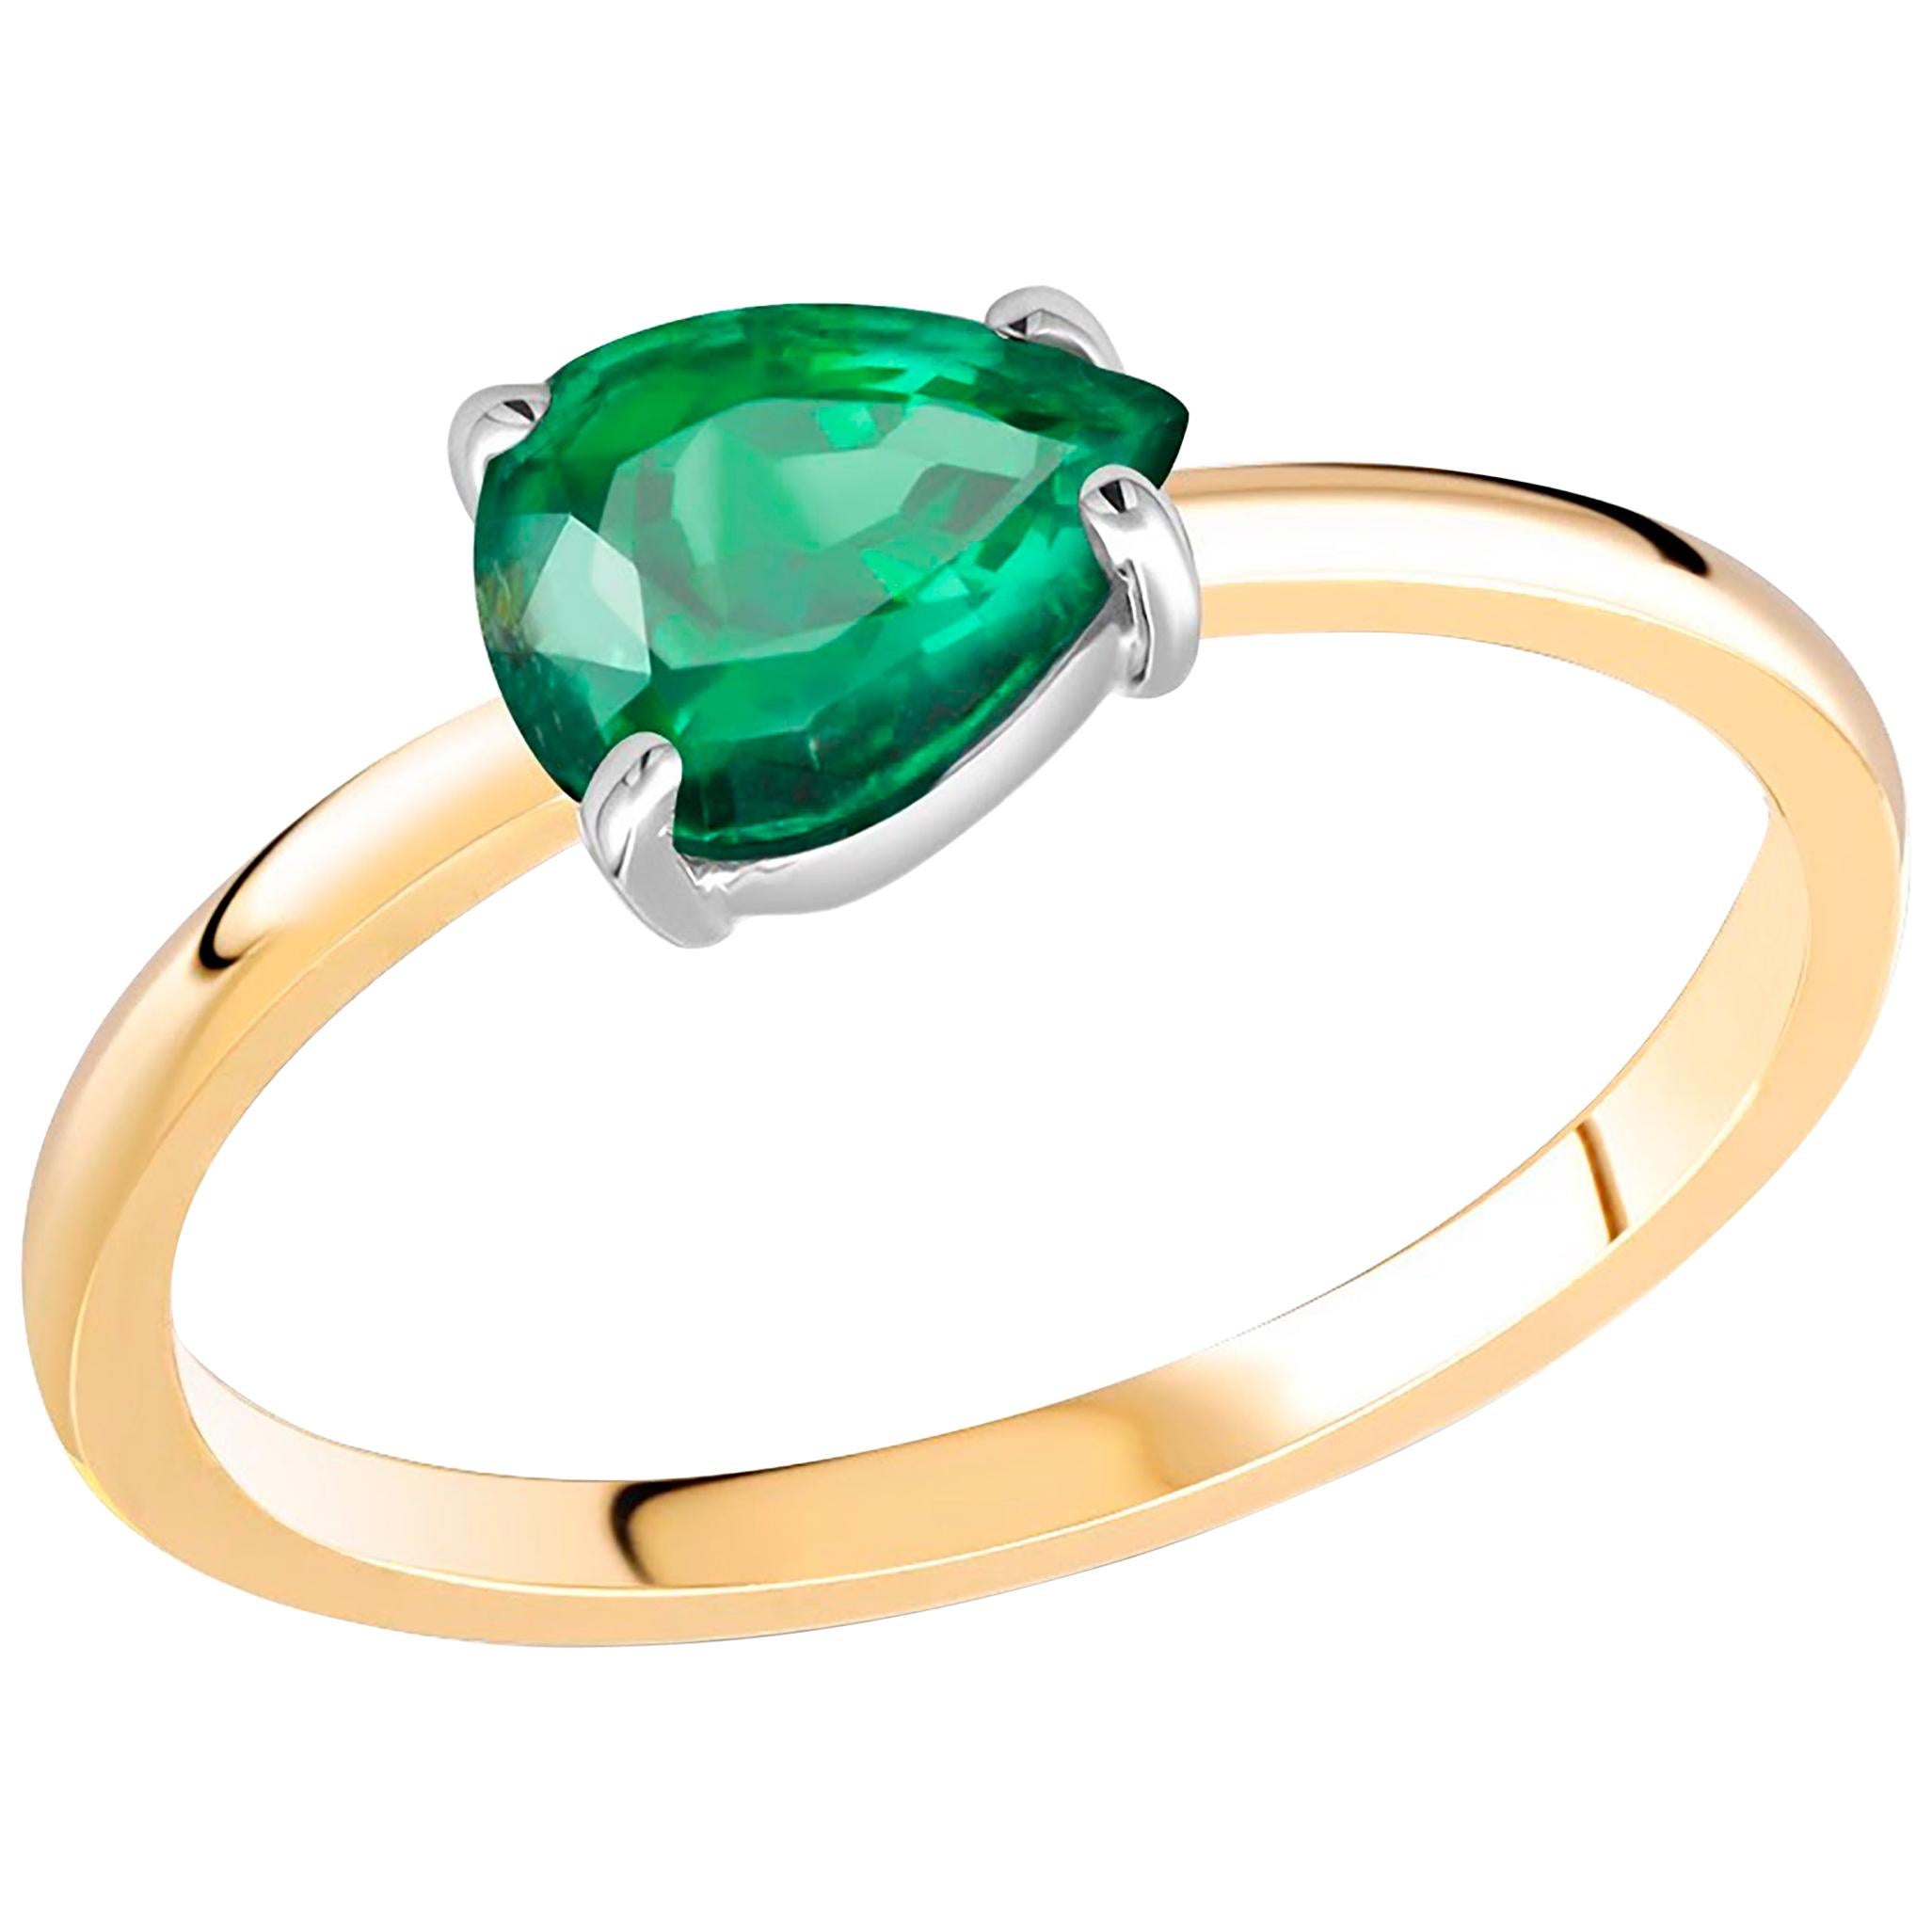 Pear Shaped Emerald Yellow and White Gold Cocktail Ring Weighing 1.20 Carat